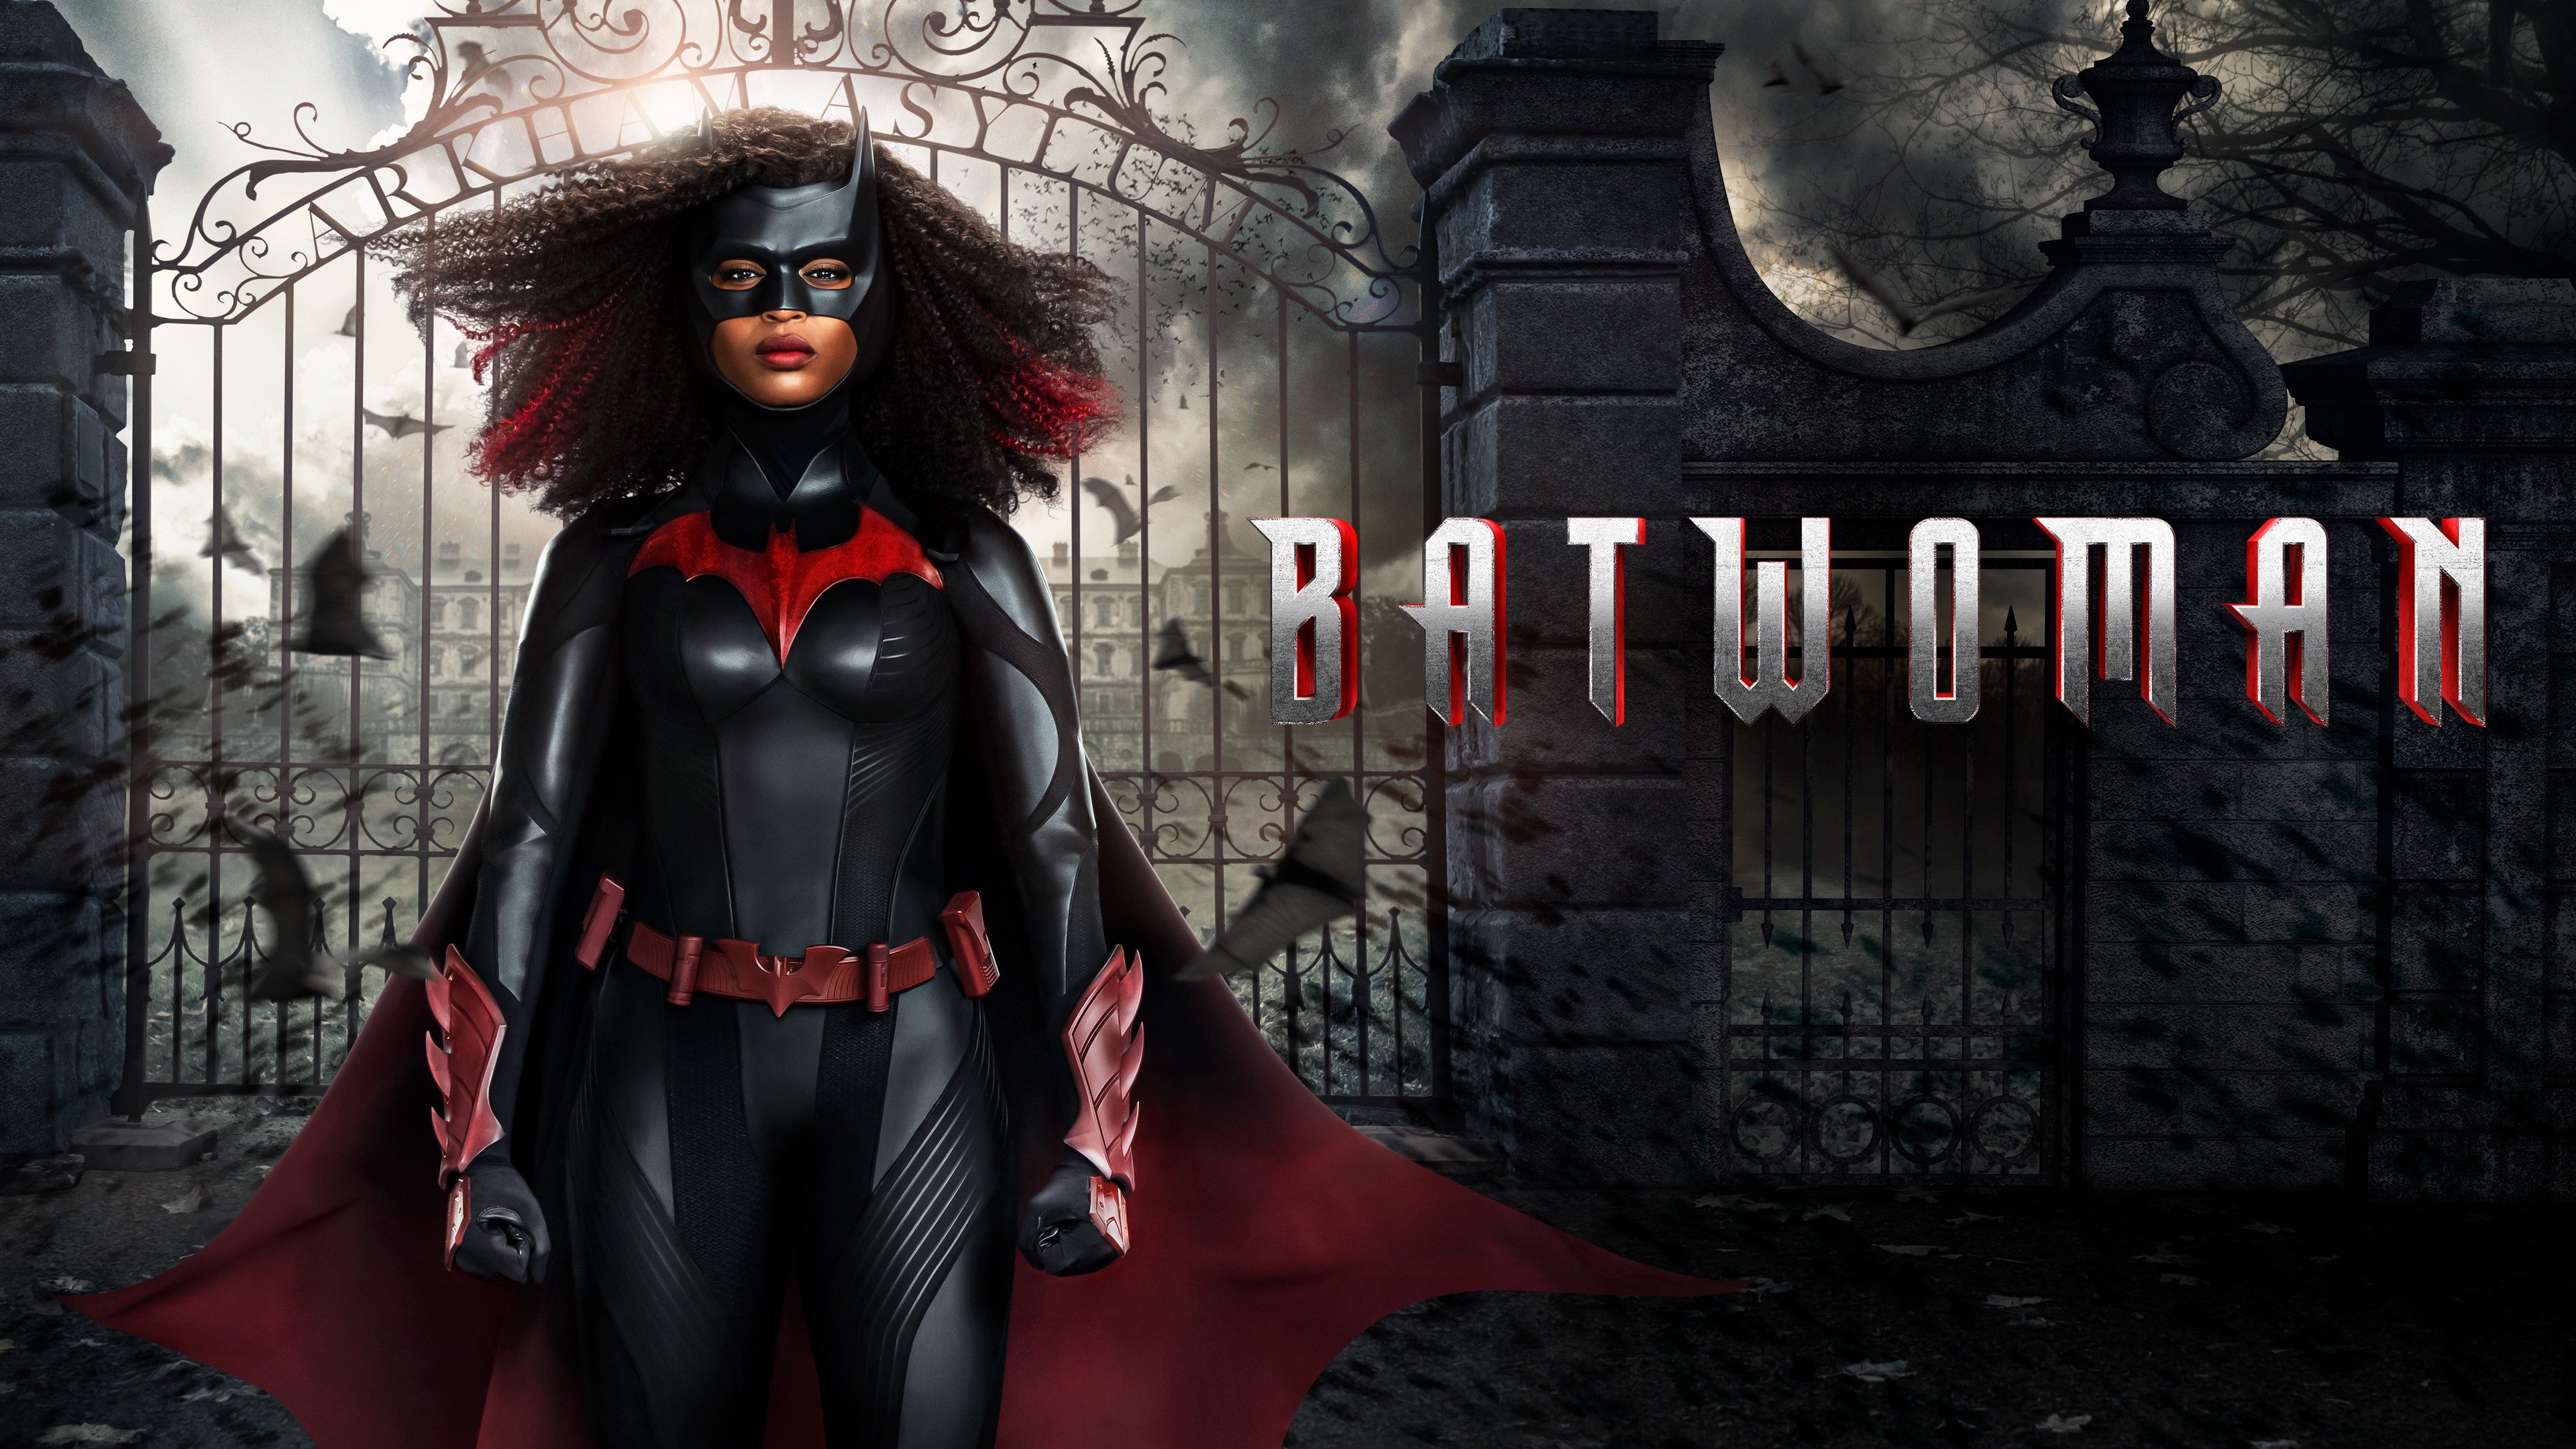 Has anyone watched the batwoman series and is it any good? : r/batman